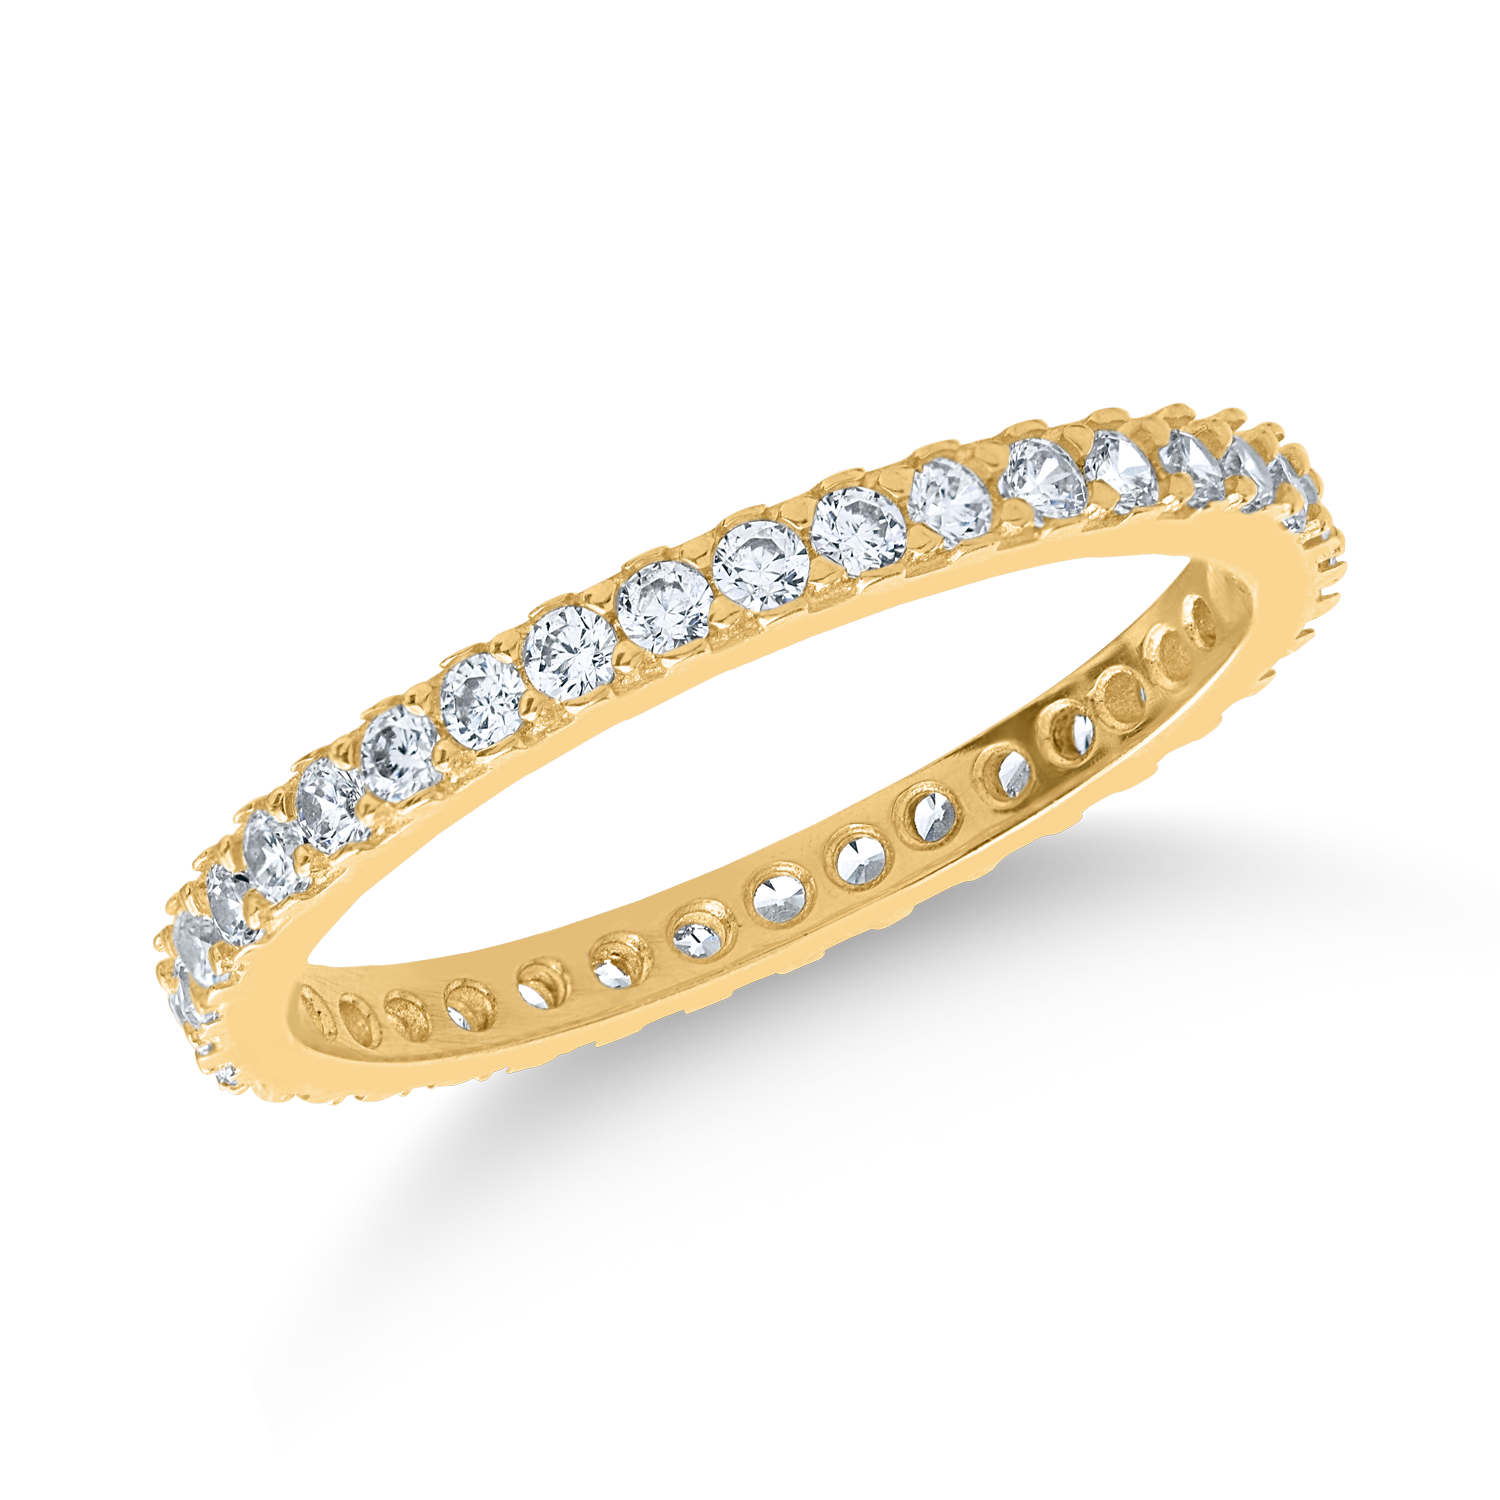 Eternity ring in yellow gold